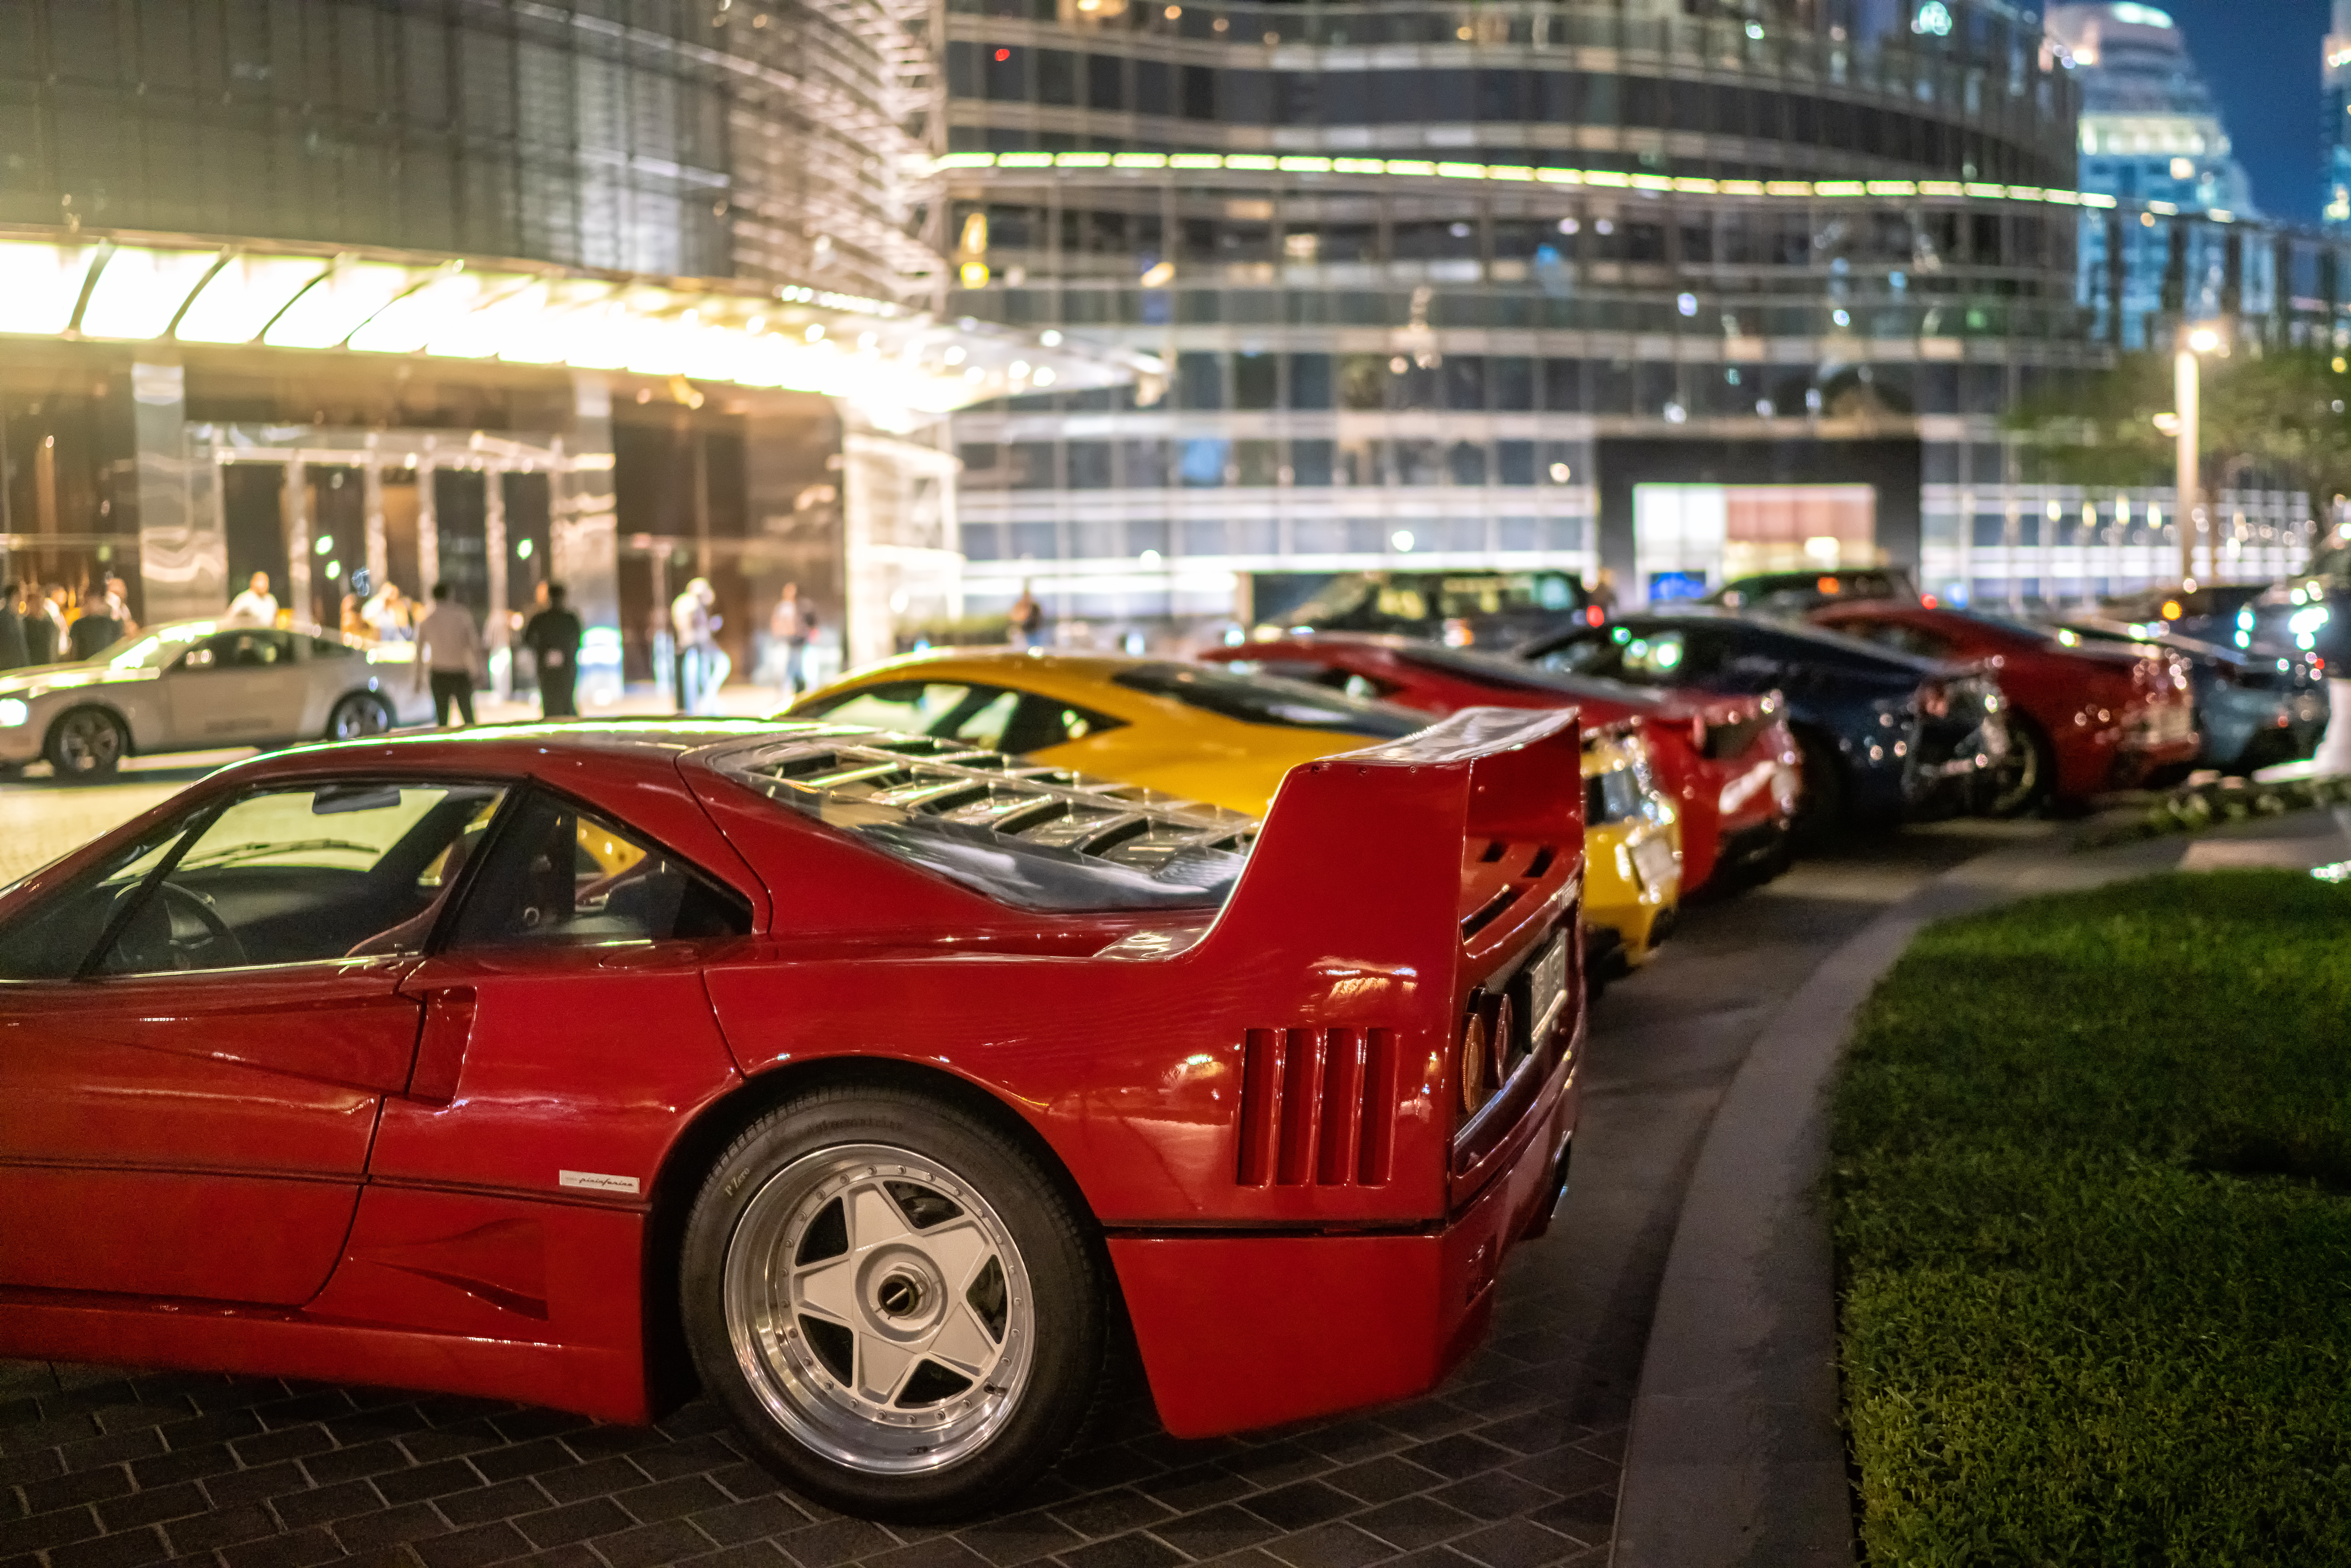 The Middle East’s first officially recognized Ferrari Owners' Club, celebrated its 10th Anniversary